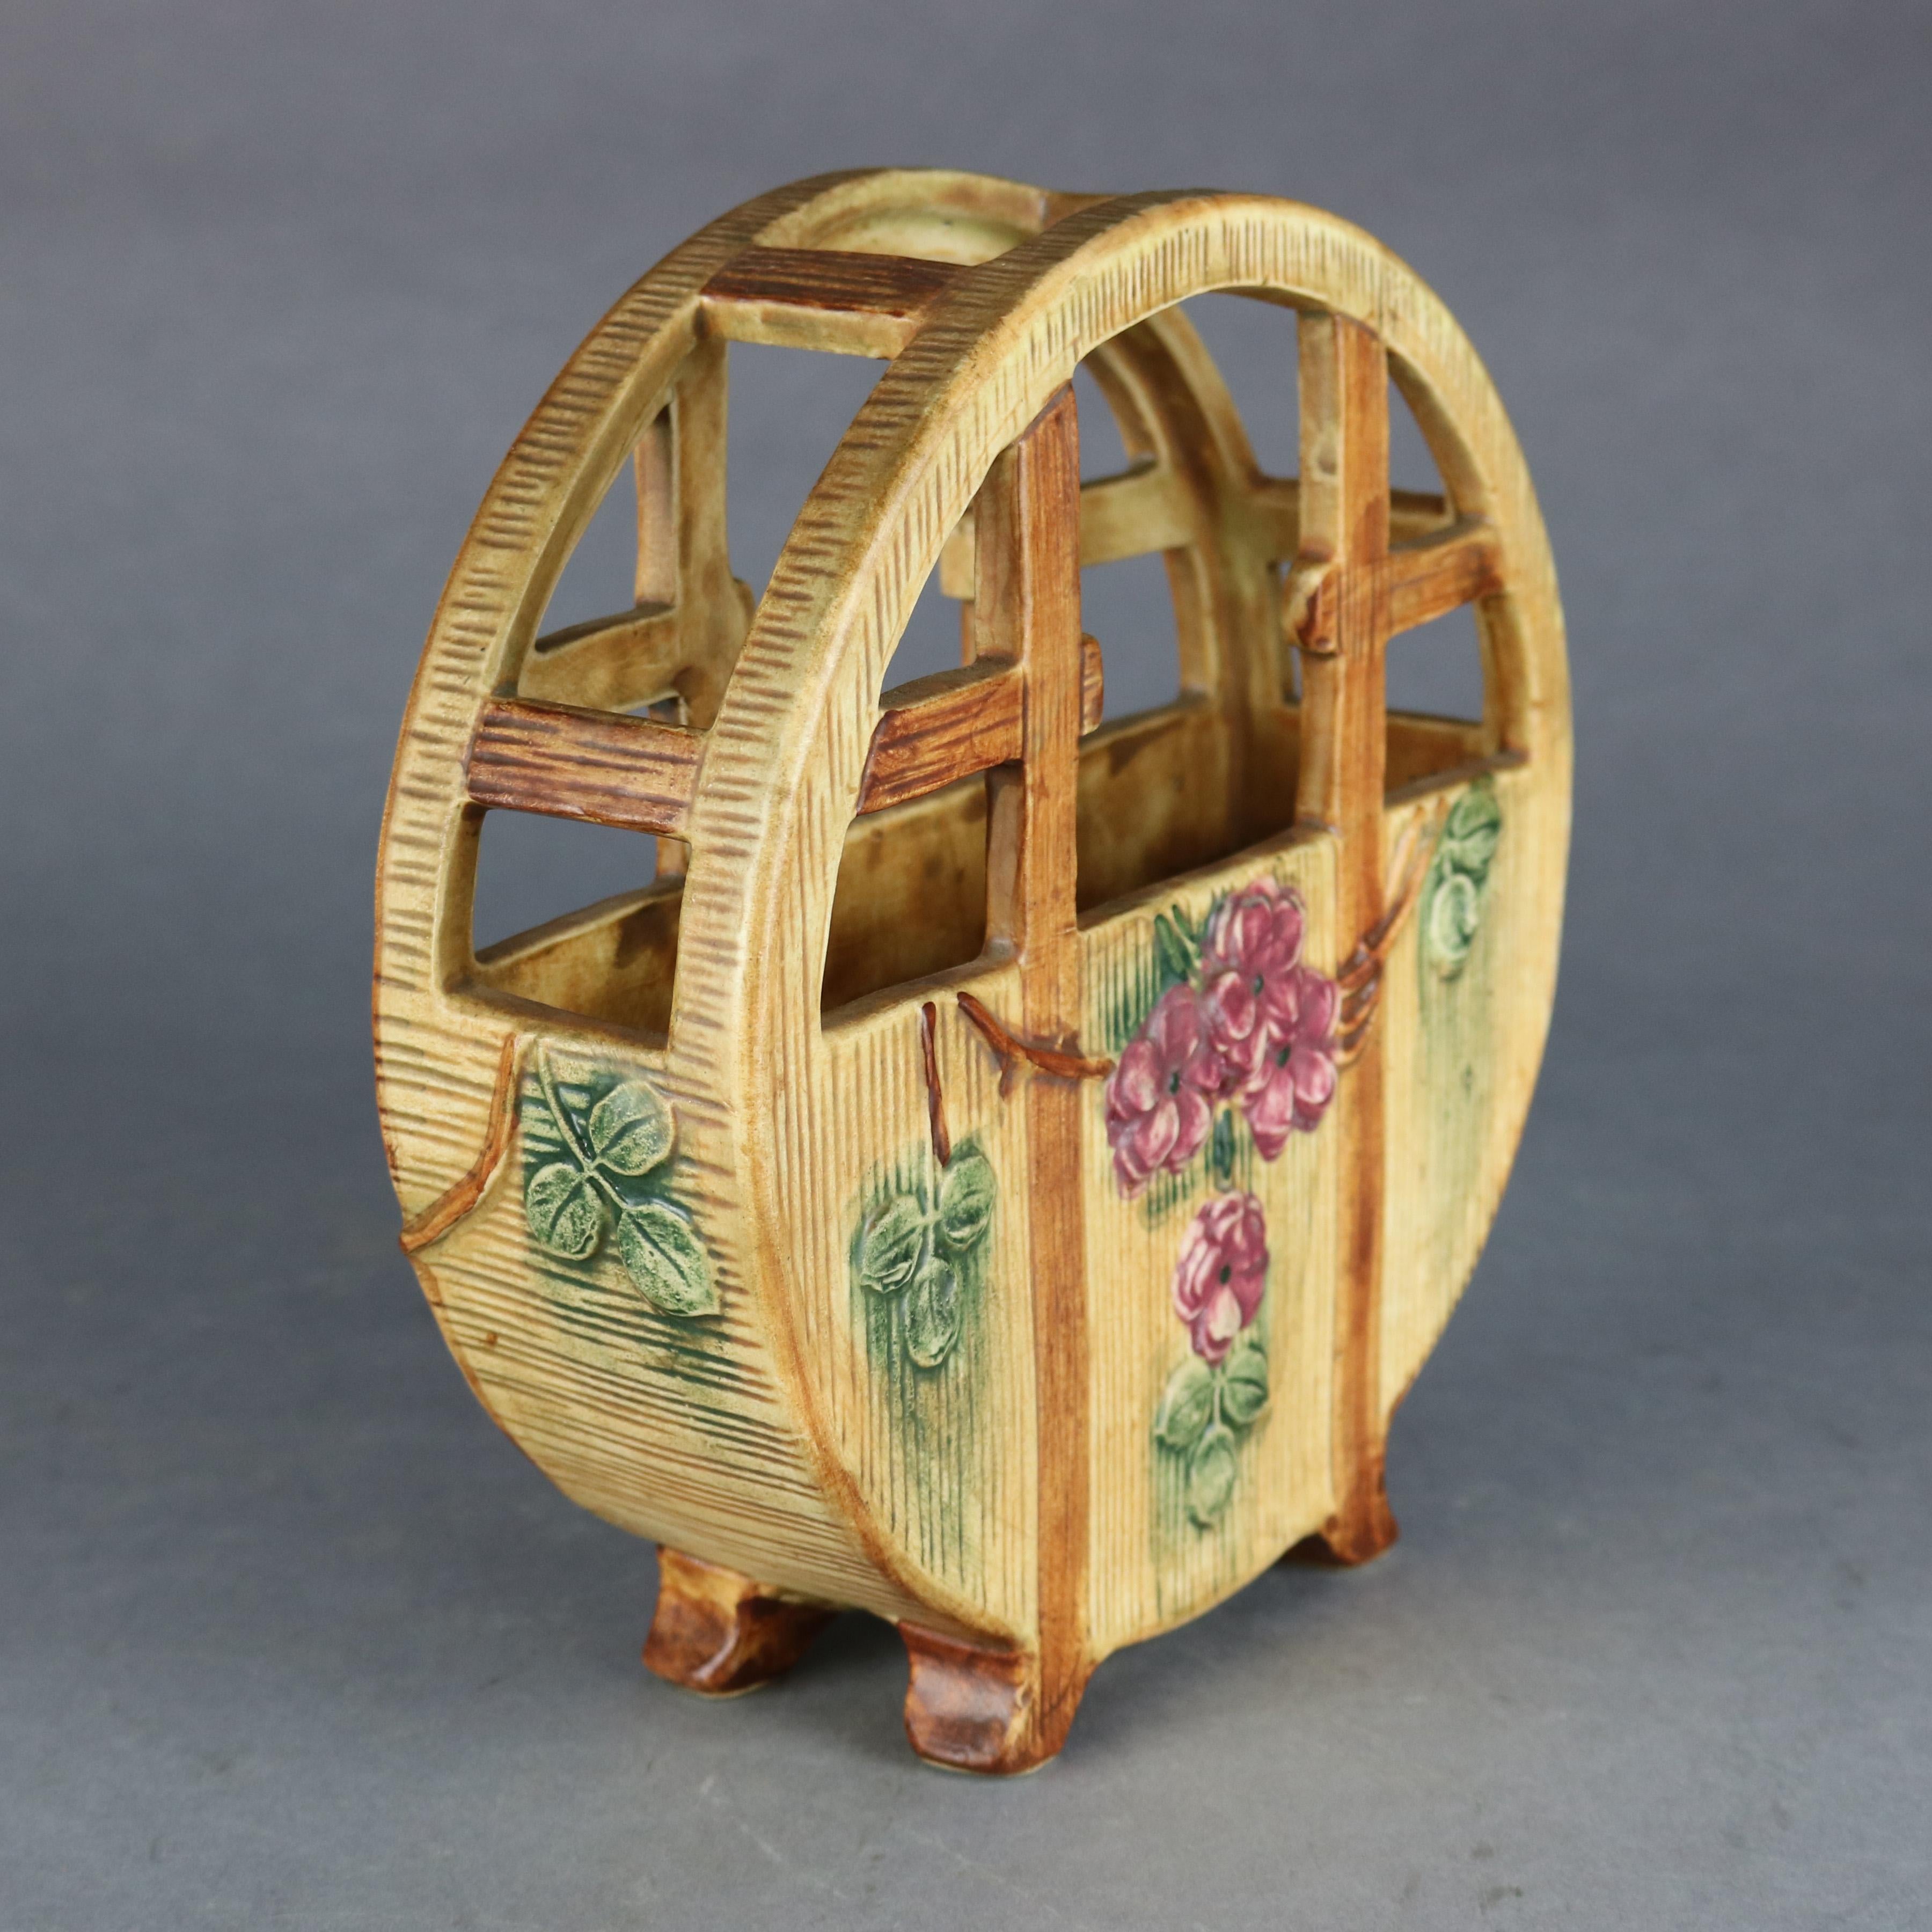 An antique Weller Woodcraft planter offers art pottery construction in circular basket form with flowers, marked on base as photographed, c1930

Measures: 8.5